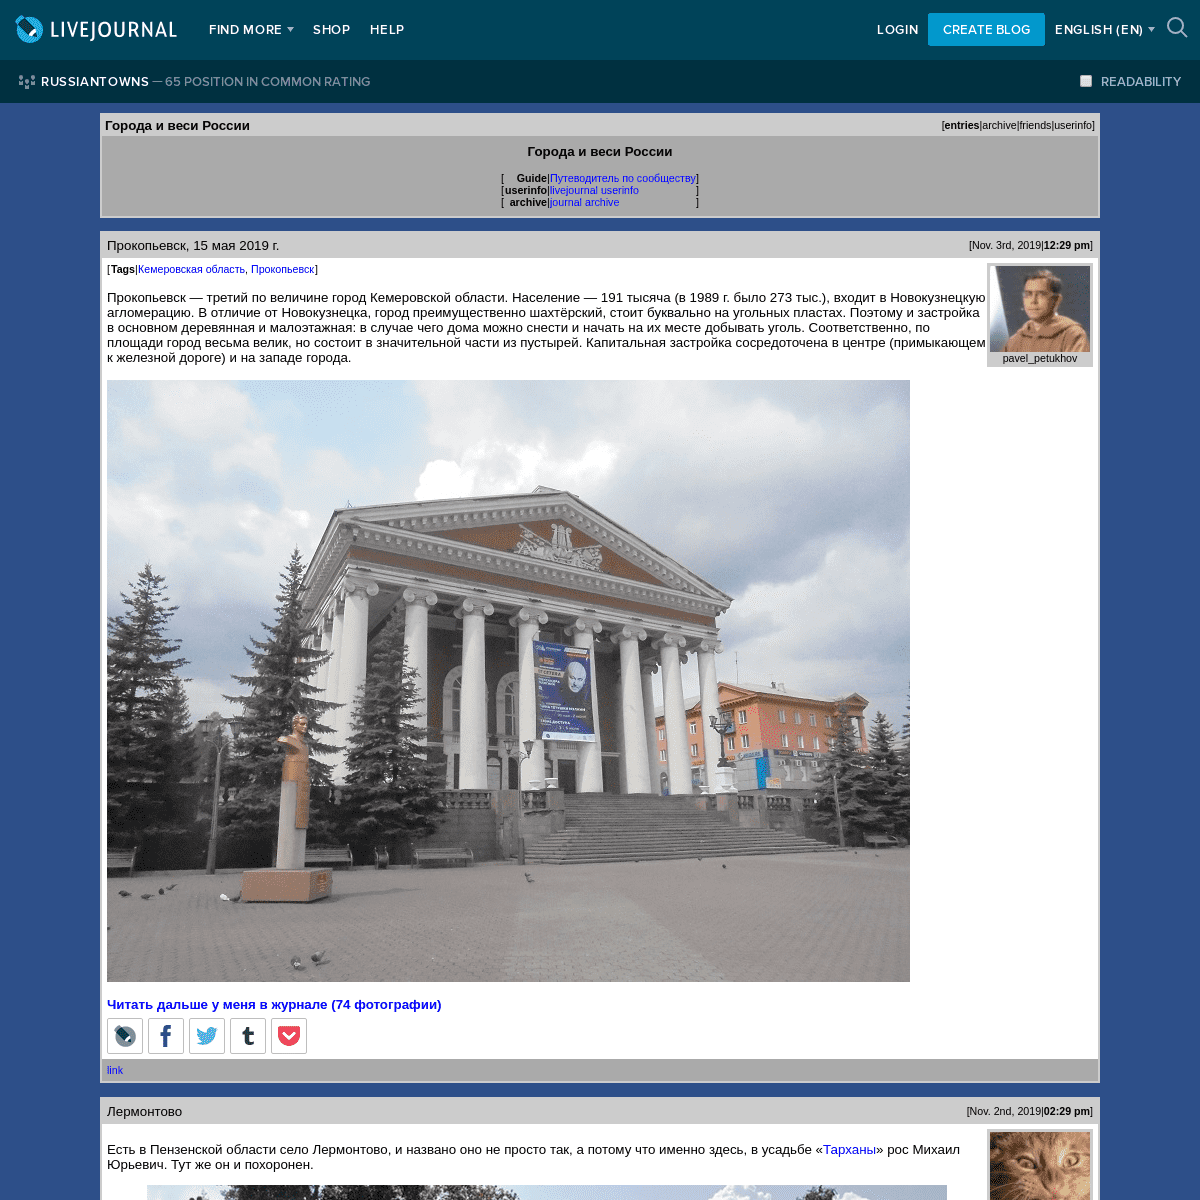 A complete backup of russiantowns.livejournal.com